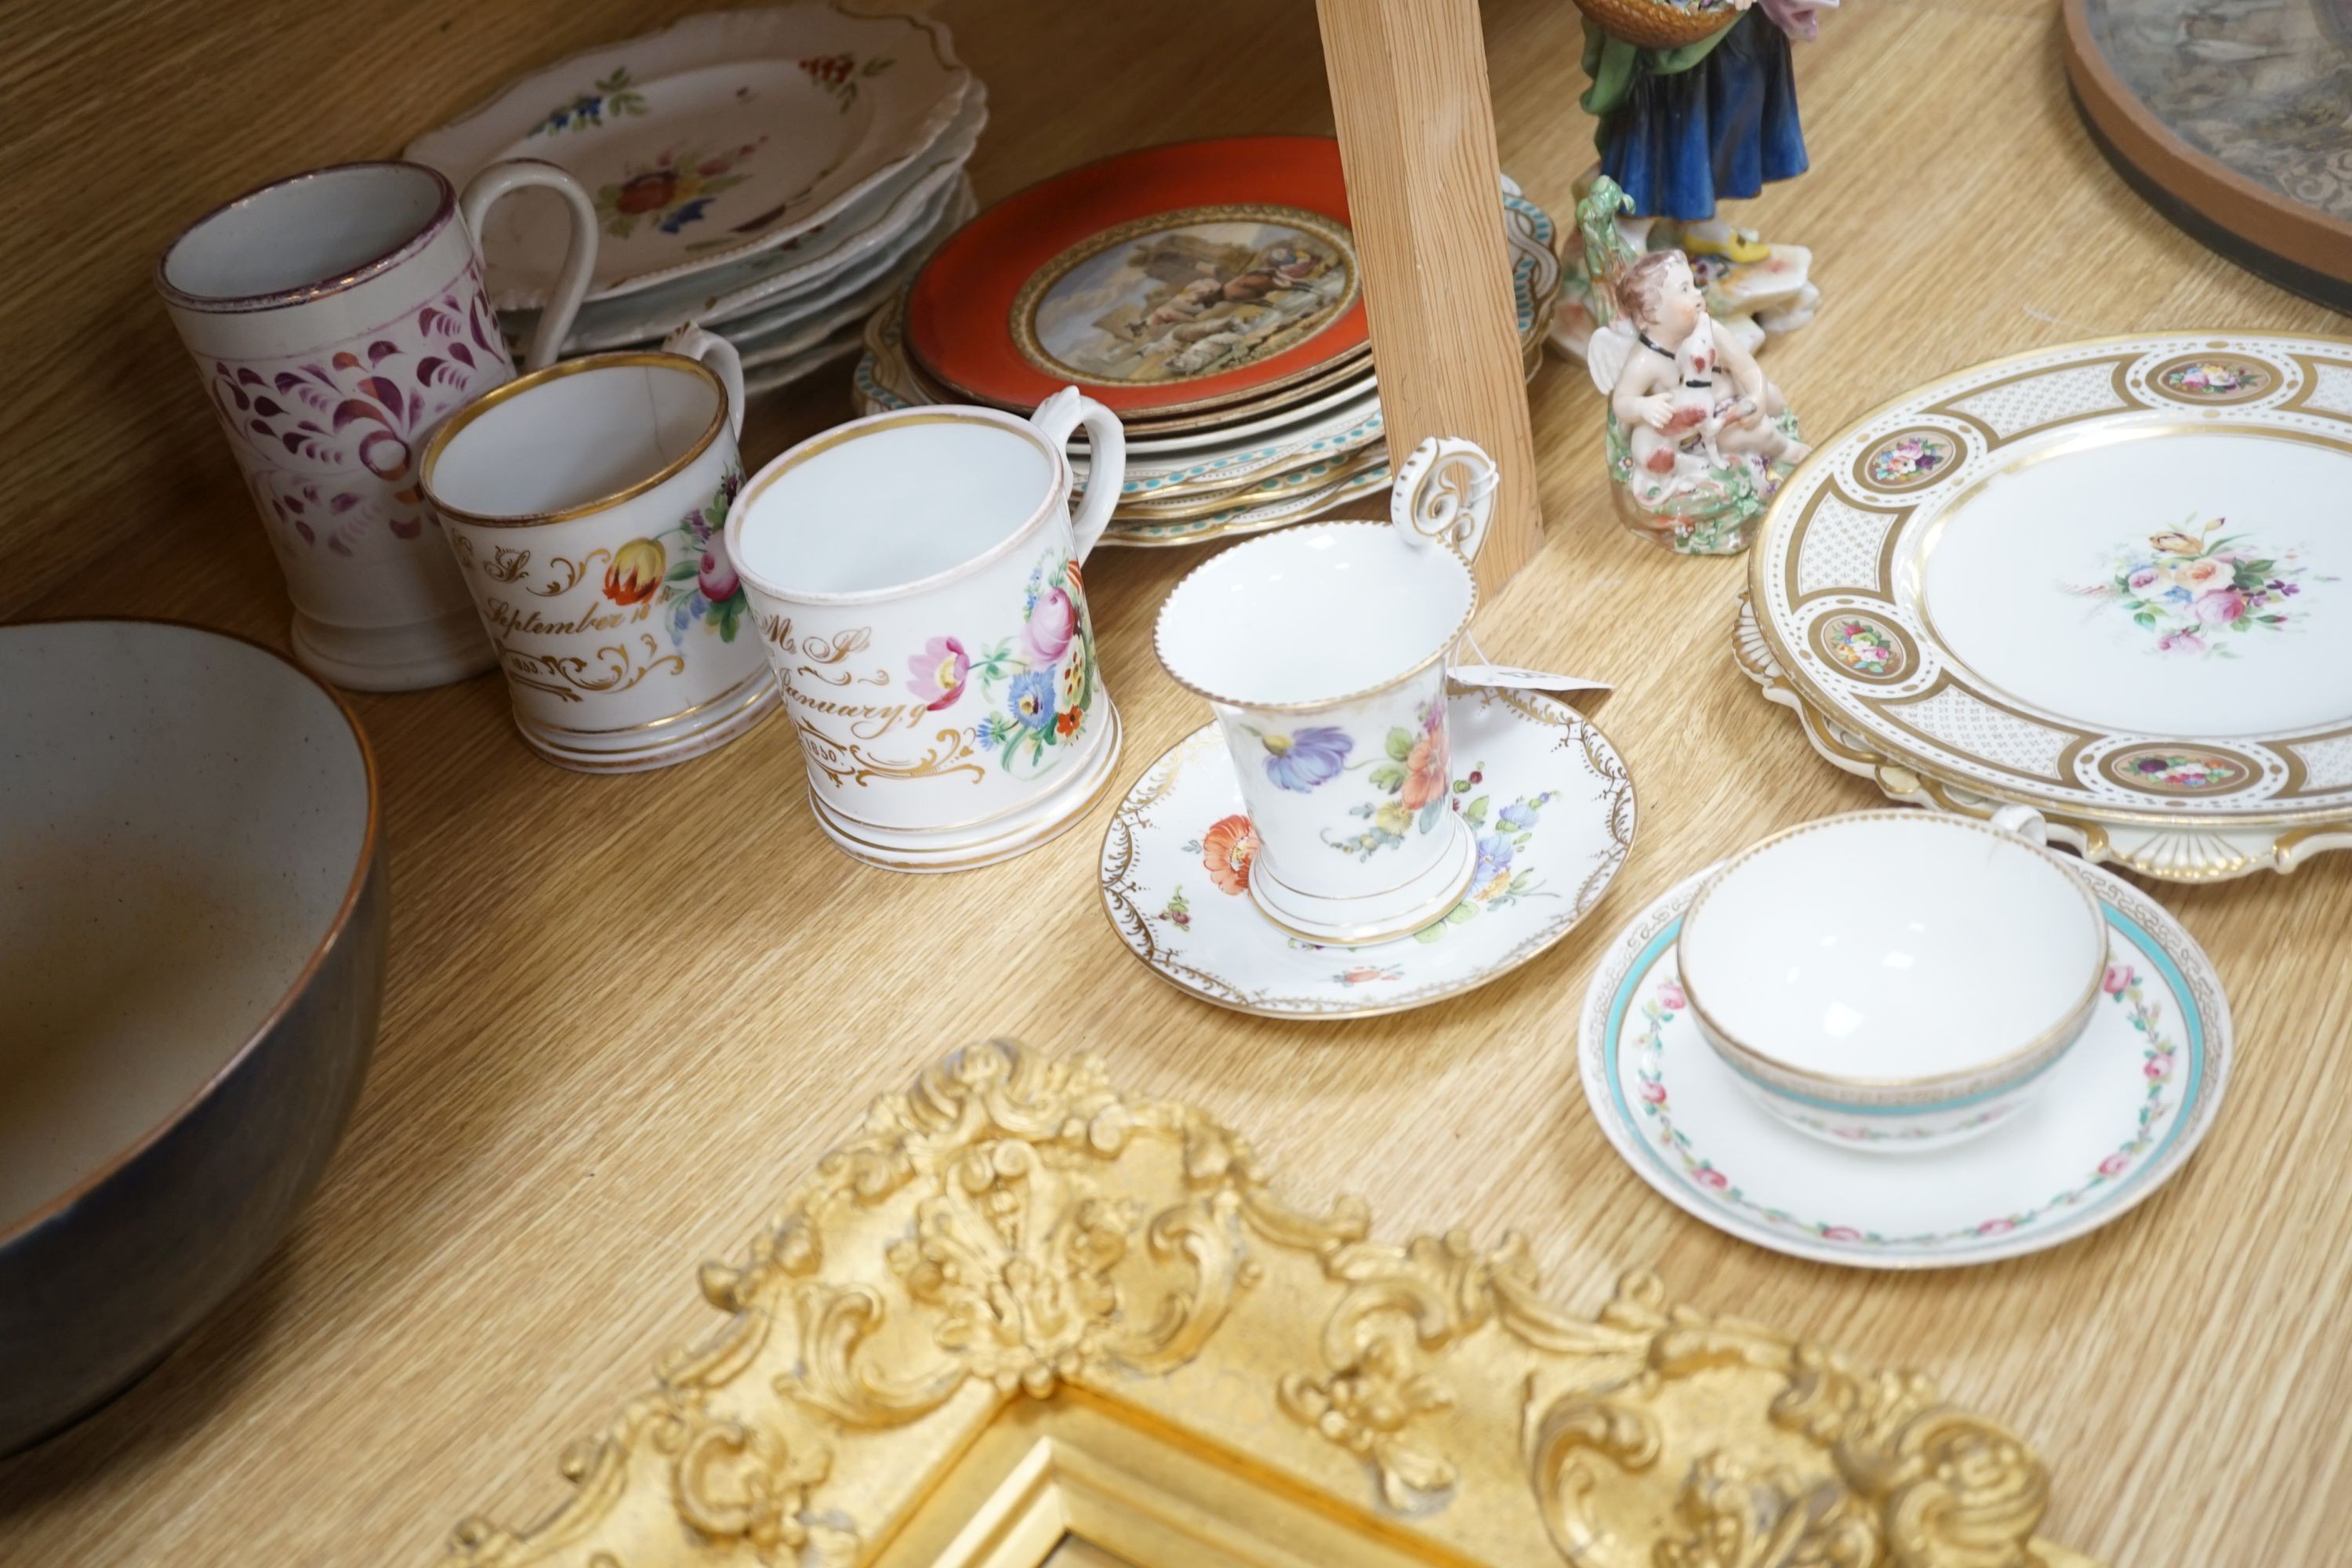 A collection of 19th century English porcelain plates and mugs and a Derby Cupid group, c.1775